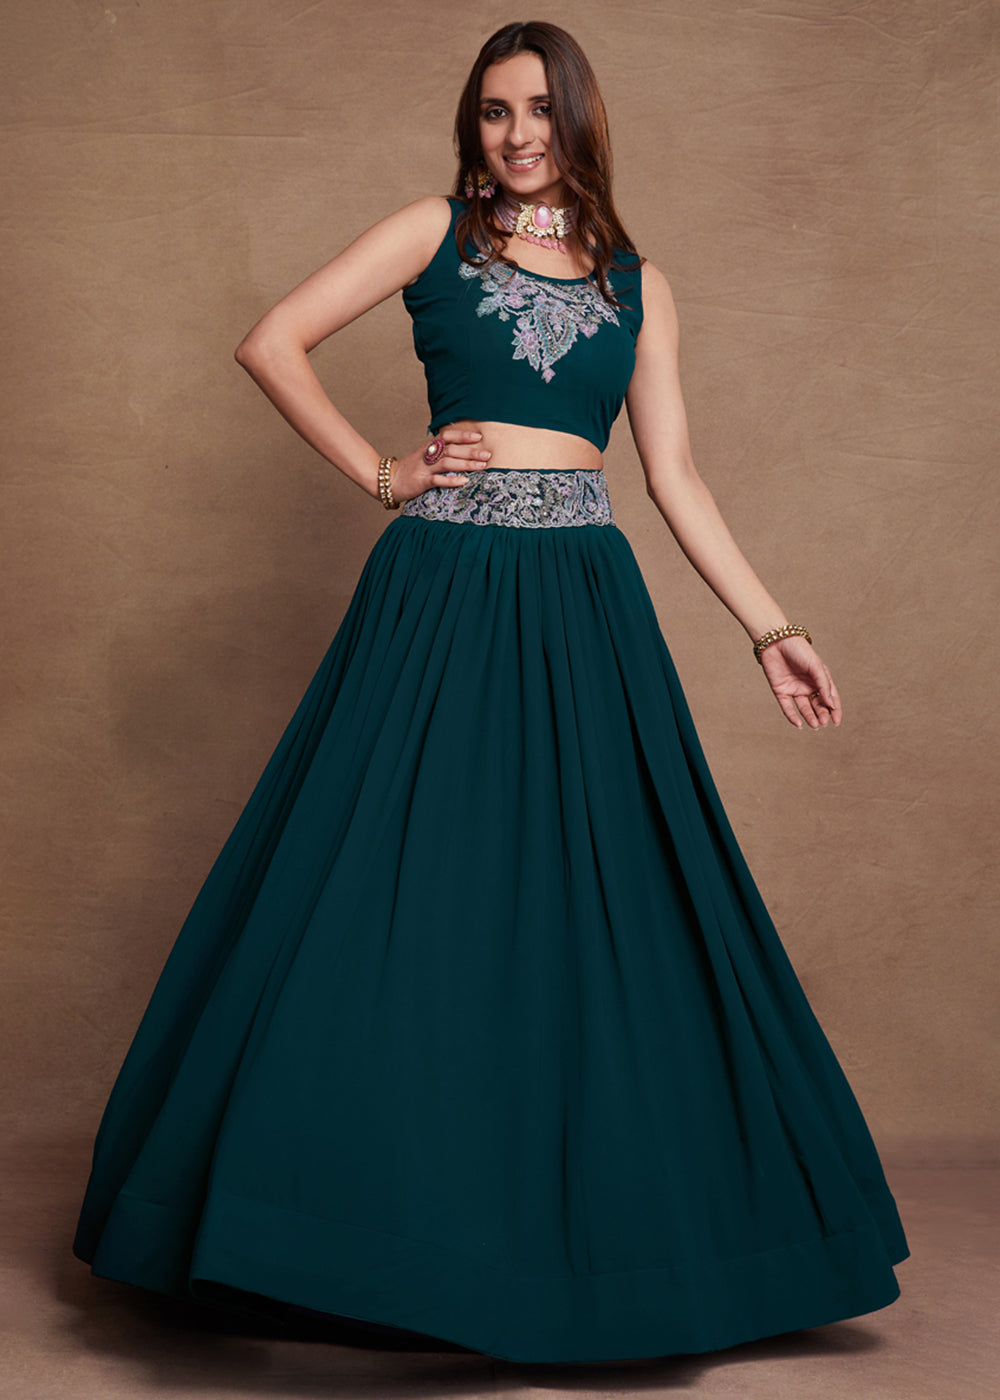 Buy Now Blooming Georgette Teal Blue Embroidered Festive Lehenga Choli Online in USA, UK, Canada & Worldwide at Empress Clothing. 